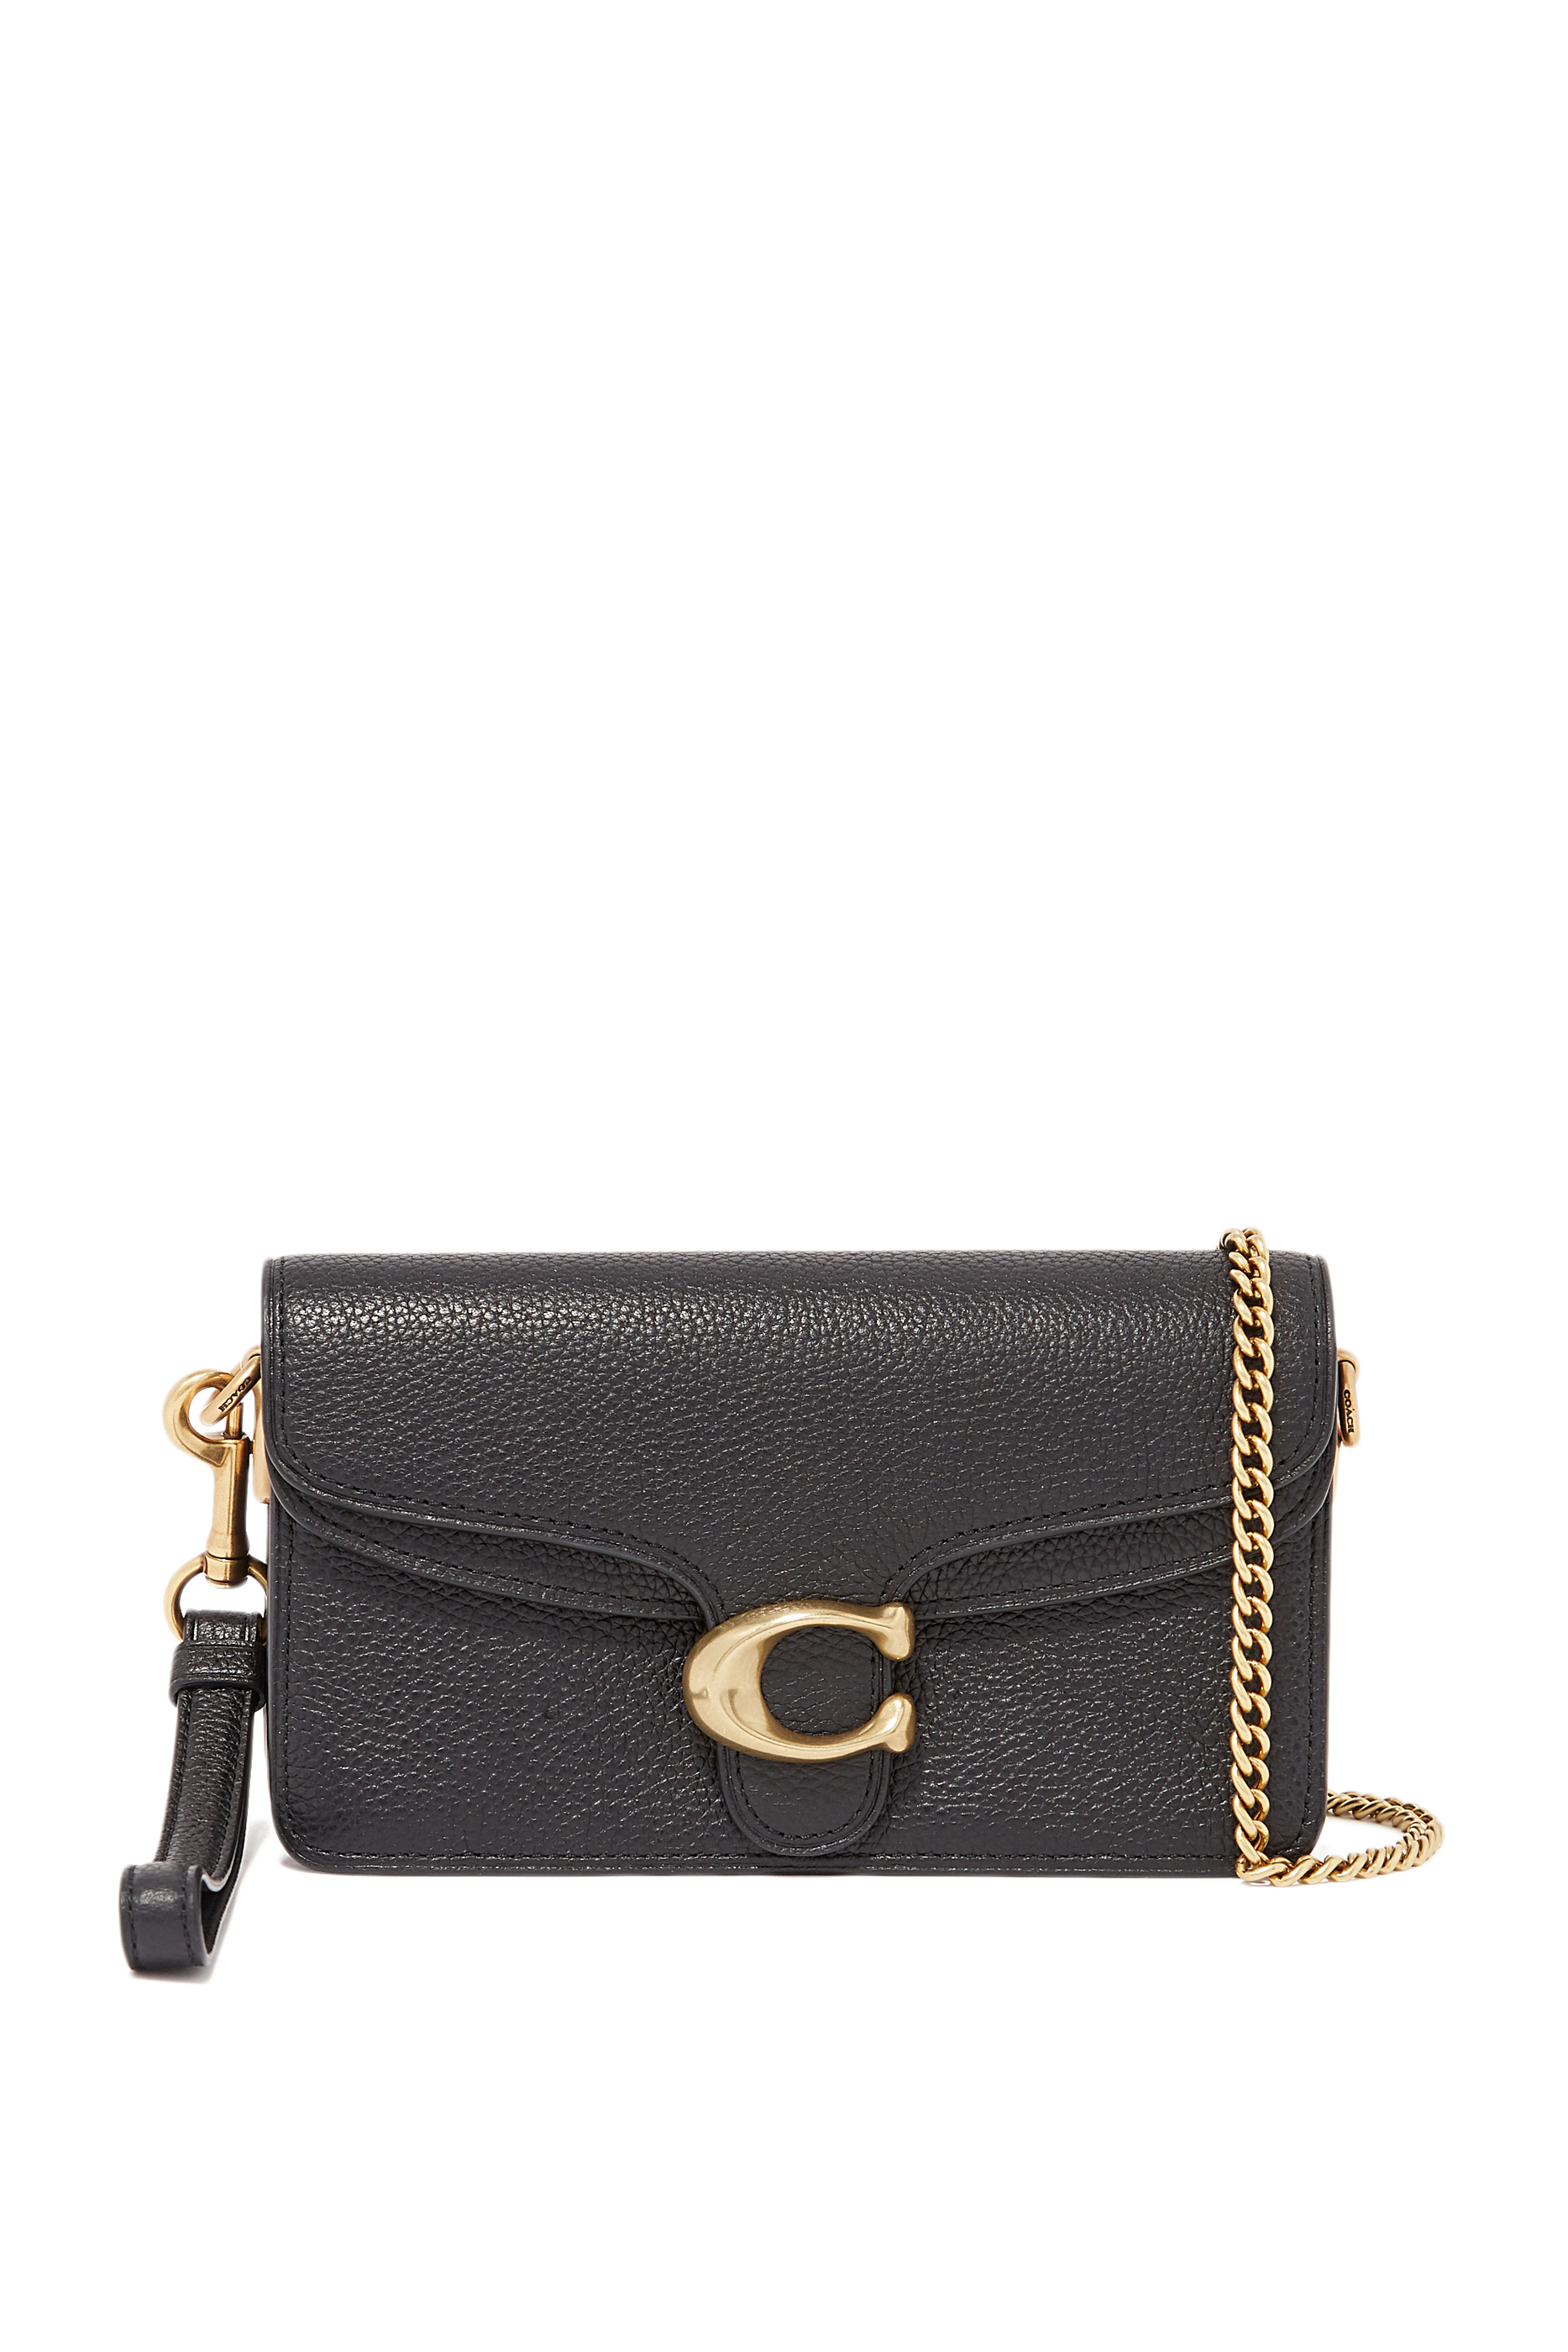 Buy Black Coach Tabby Crossbody Pebble Leather Bag - Womens for AED 1250.00 Coach | BloomingDales AE